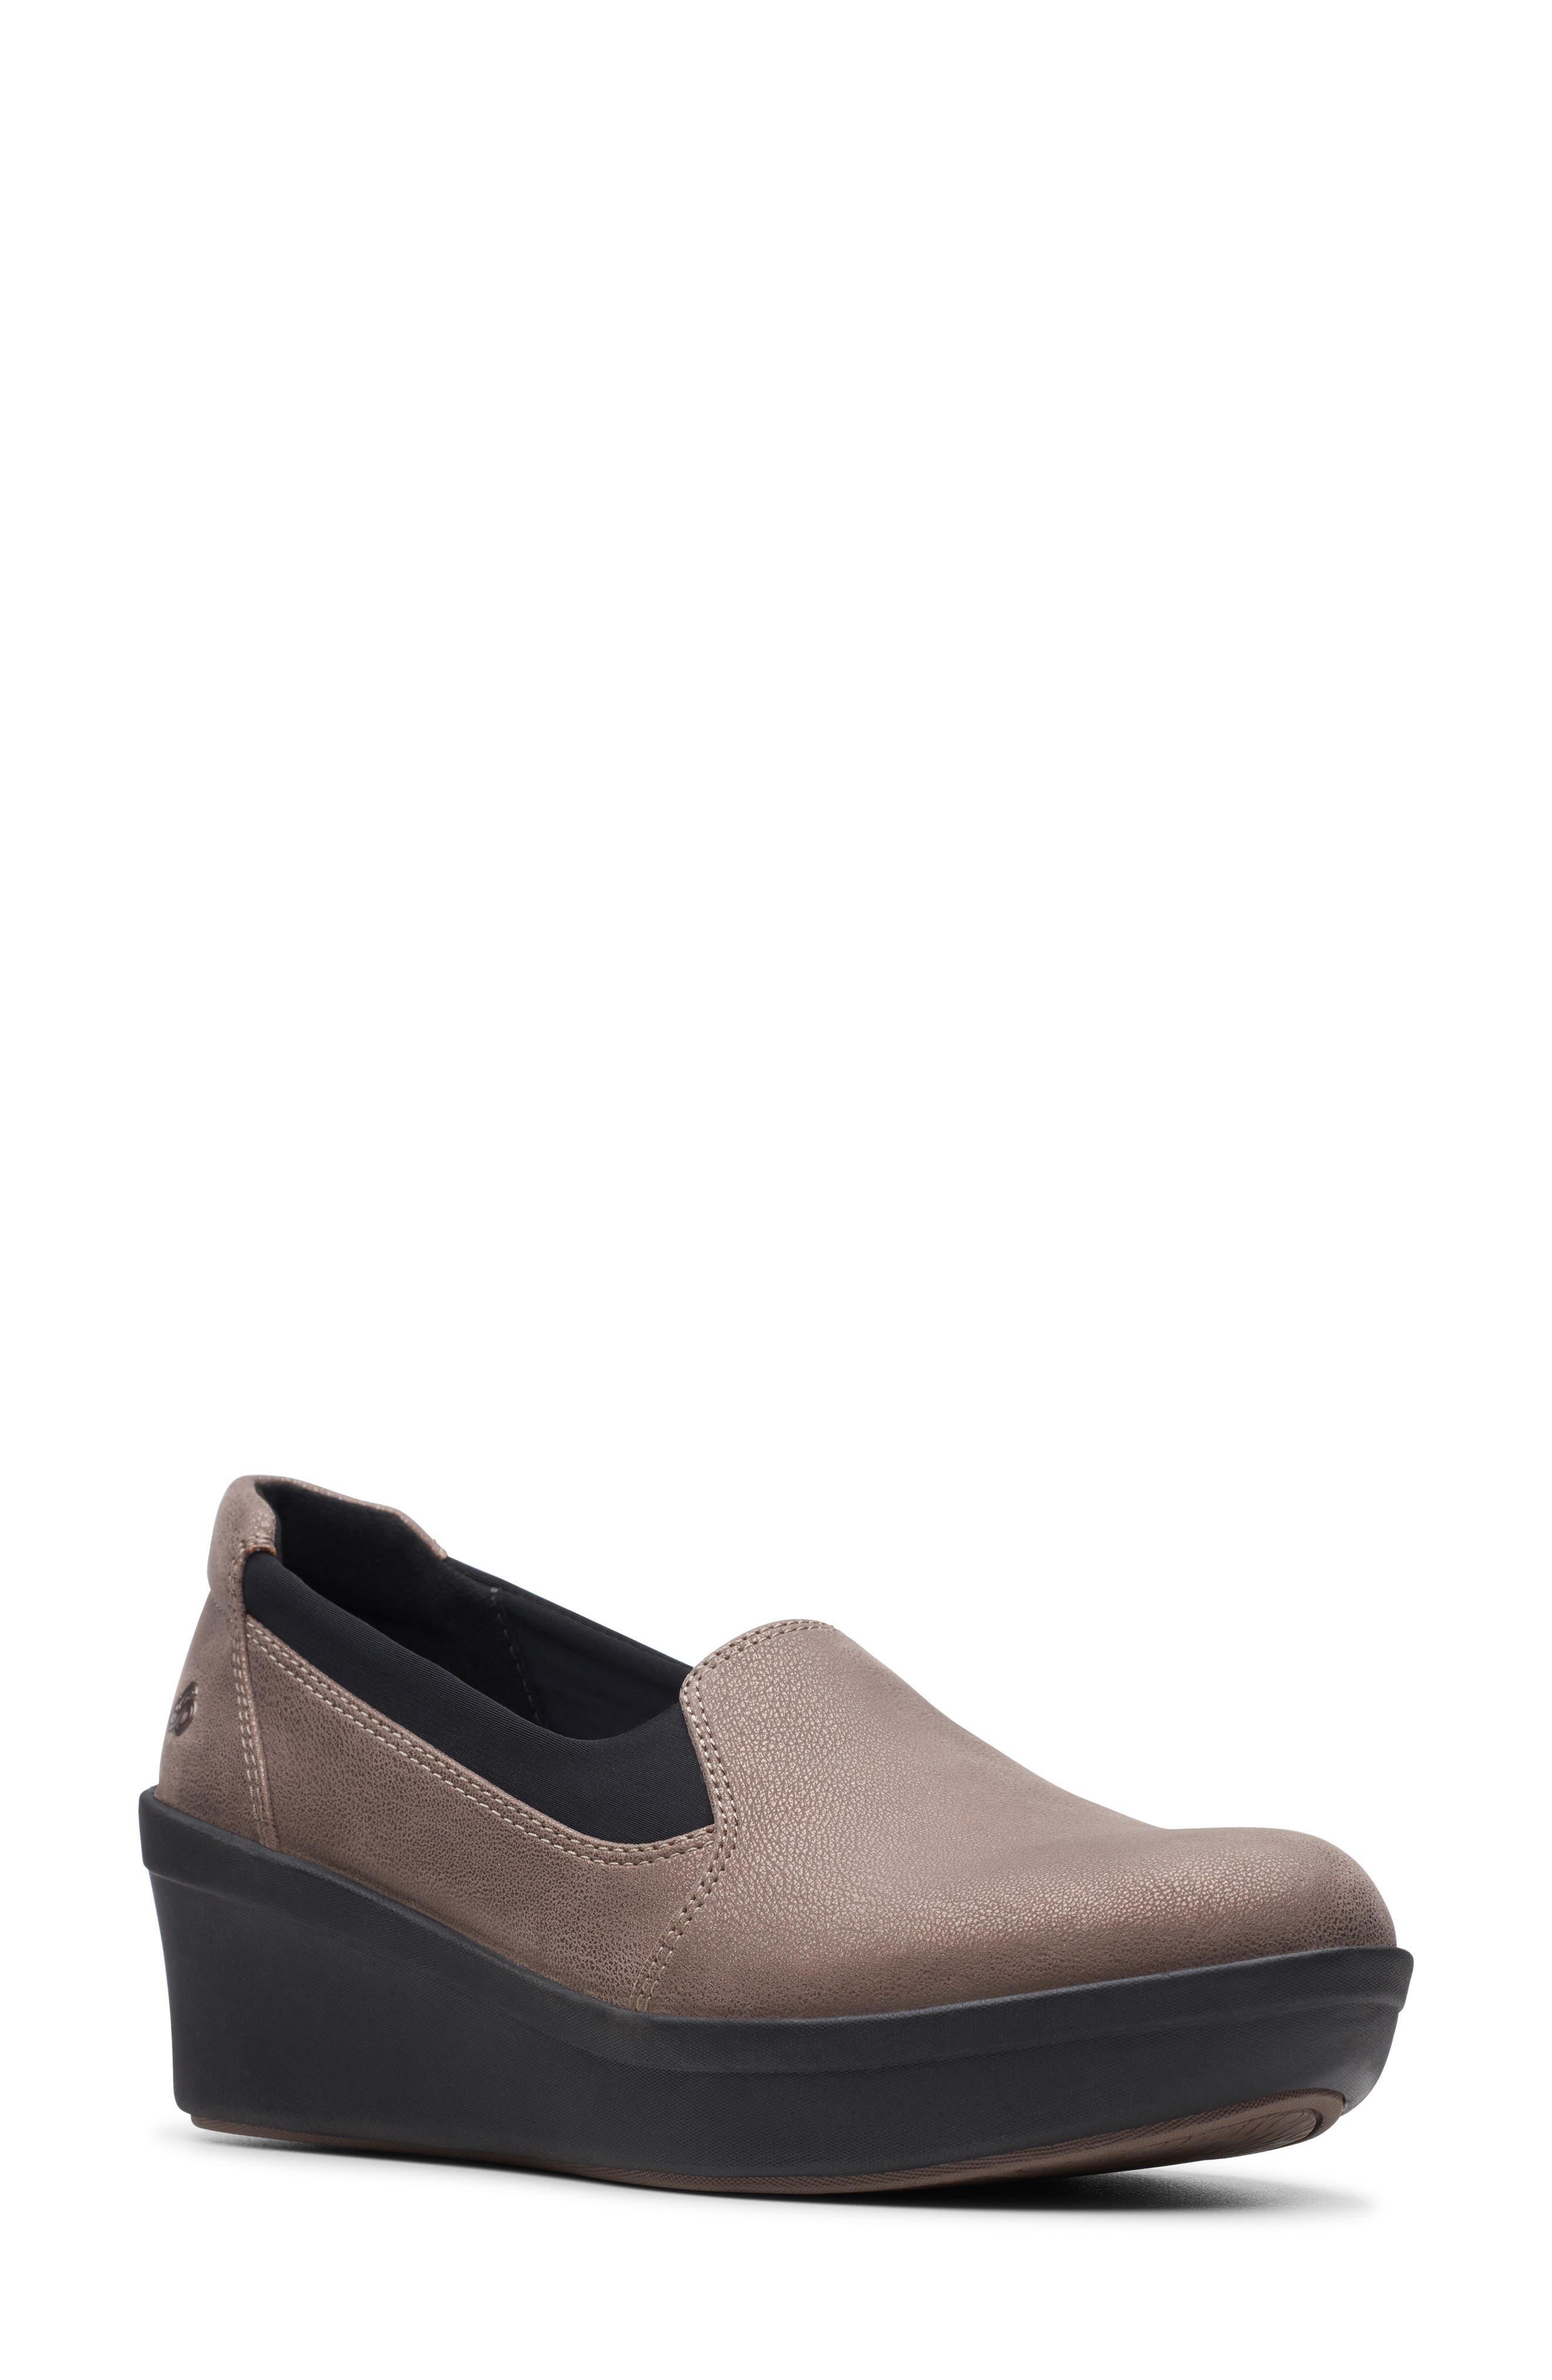 clarks shoes womens wedges